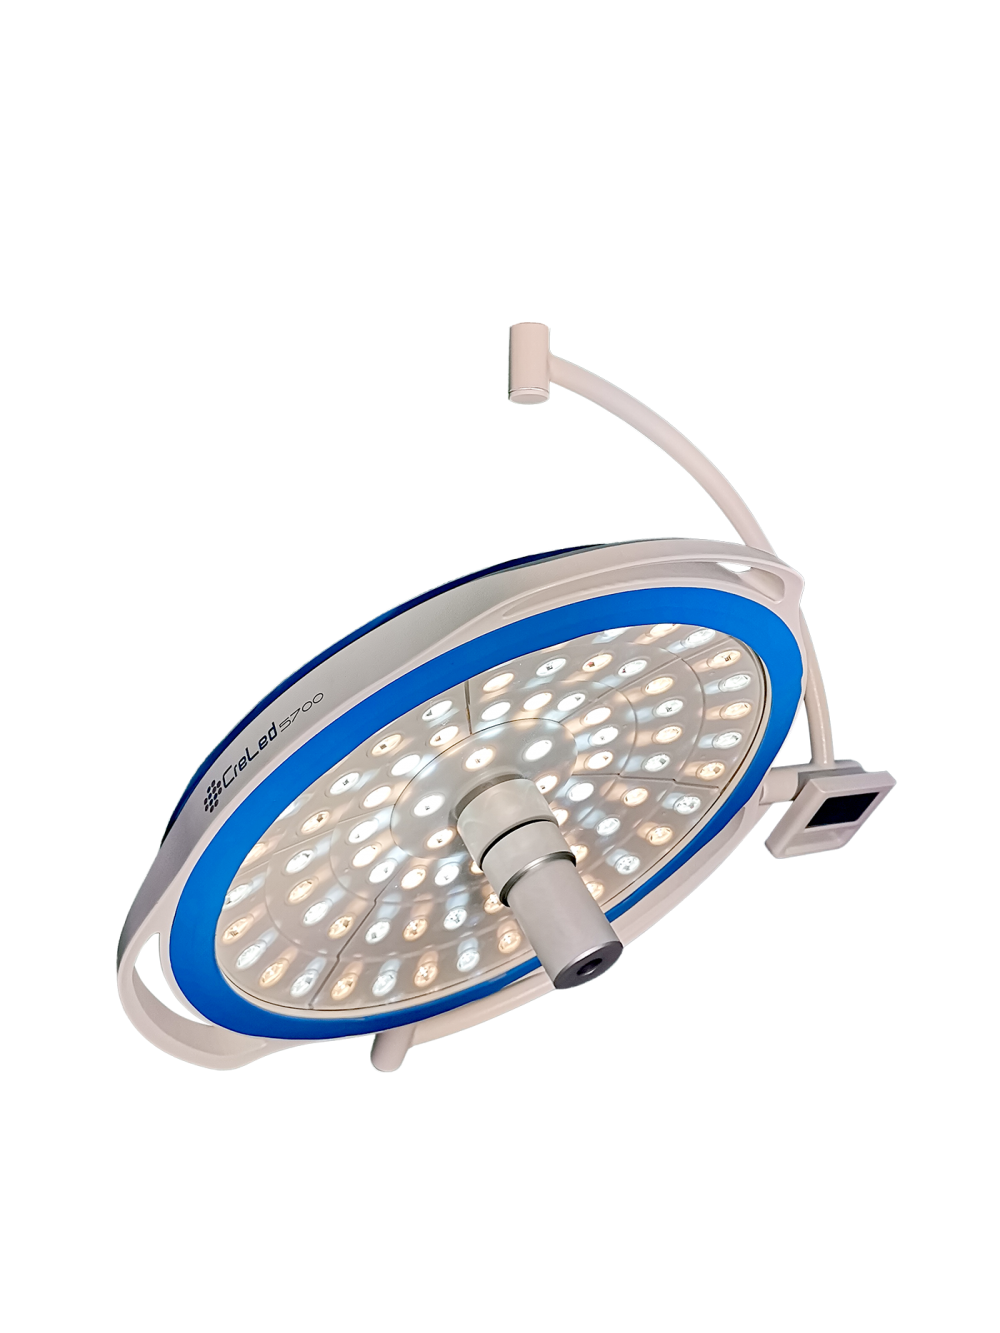 CreLed 5700 High Quality Ceiling Led Surgical Lamp